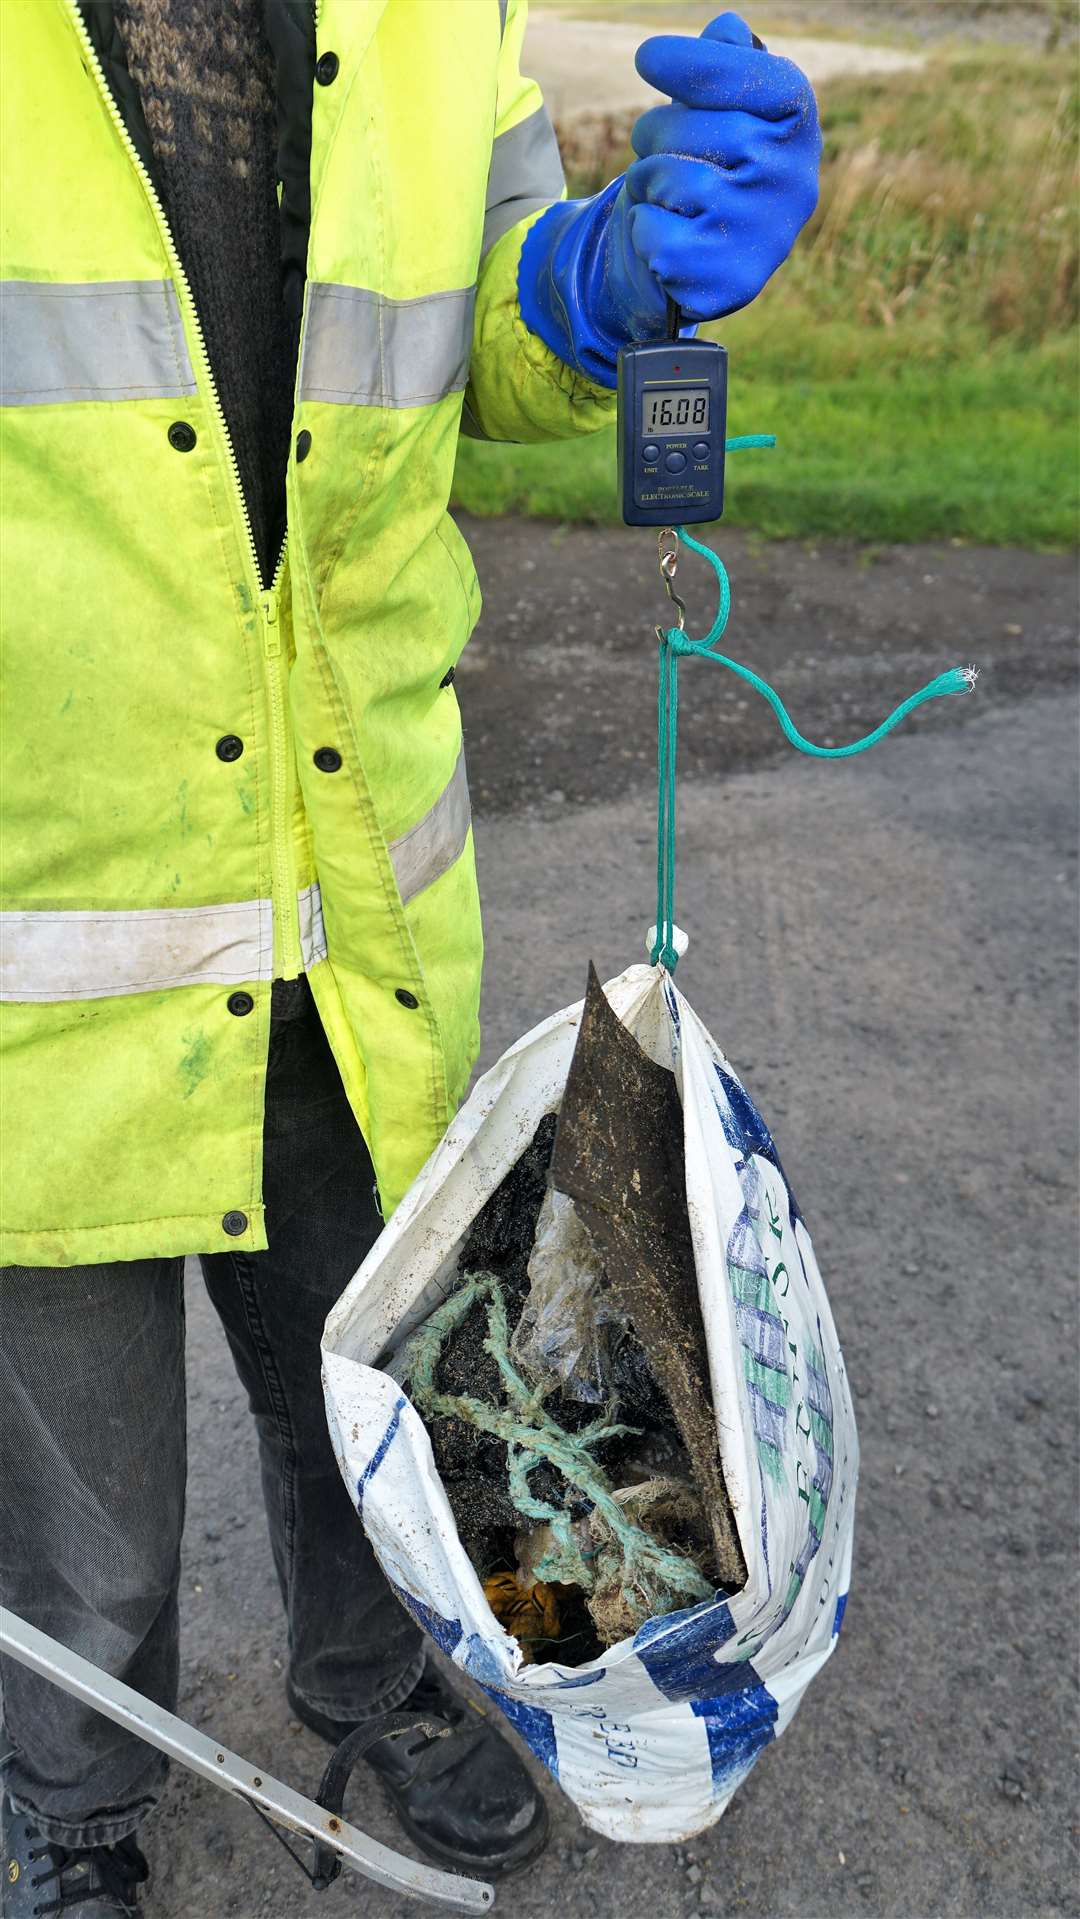 Allan Sinclair says the majority of waste material found on the Caithness coast is fishing related. Picture: DGS